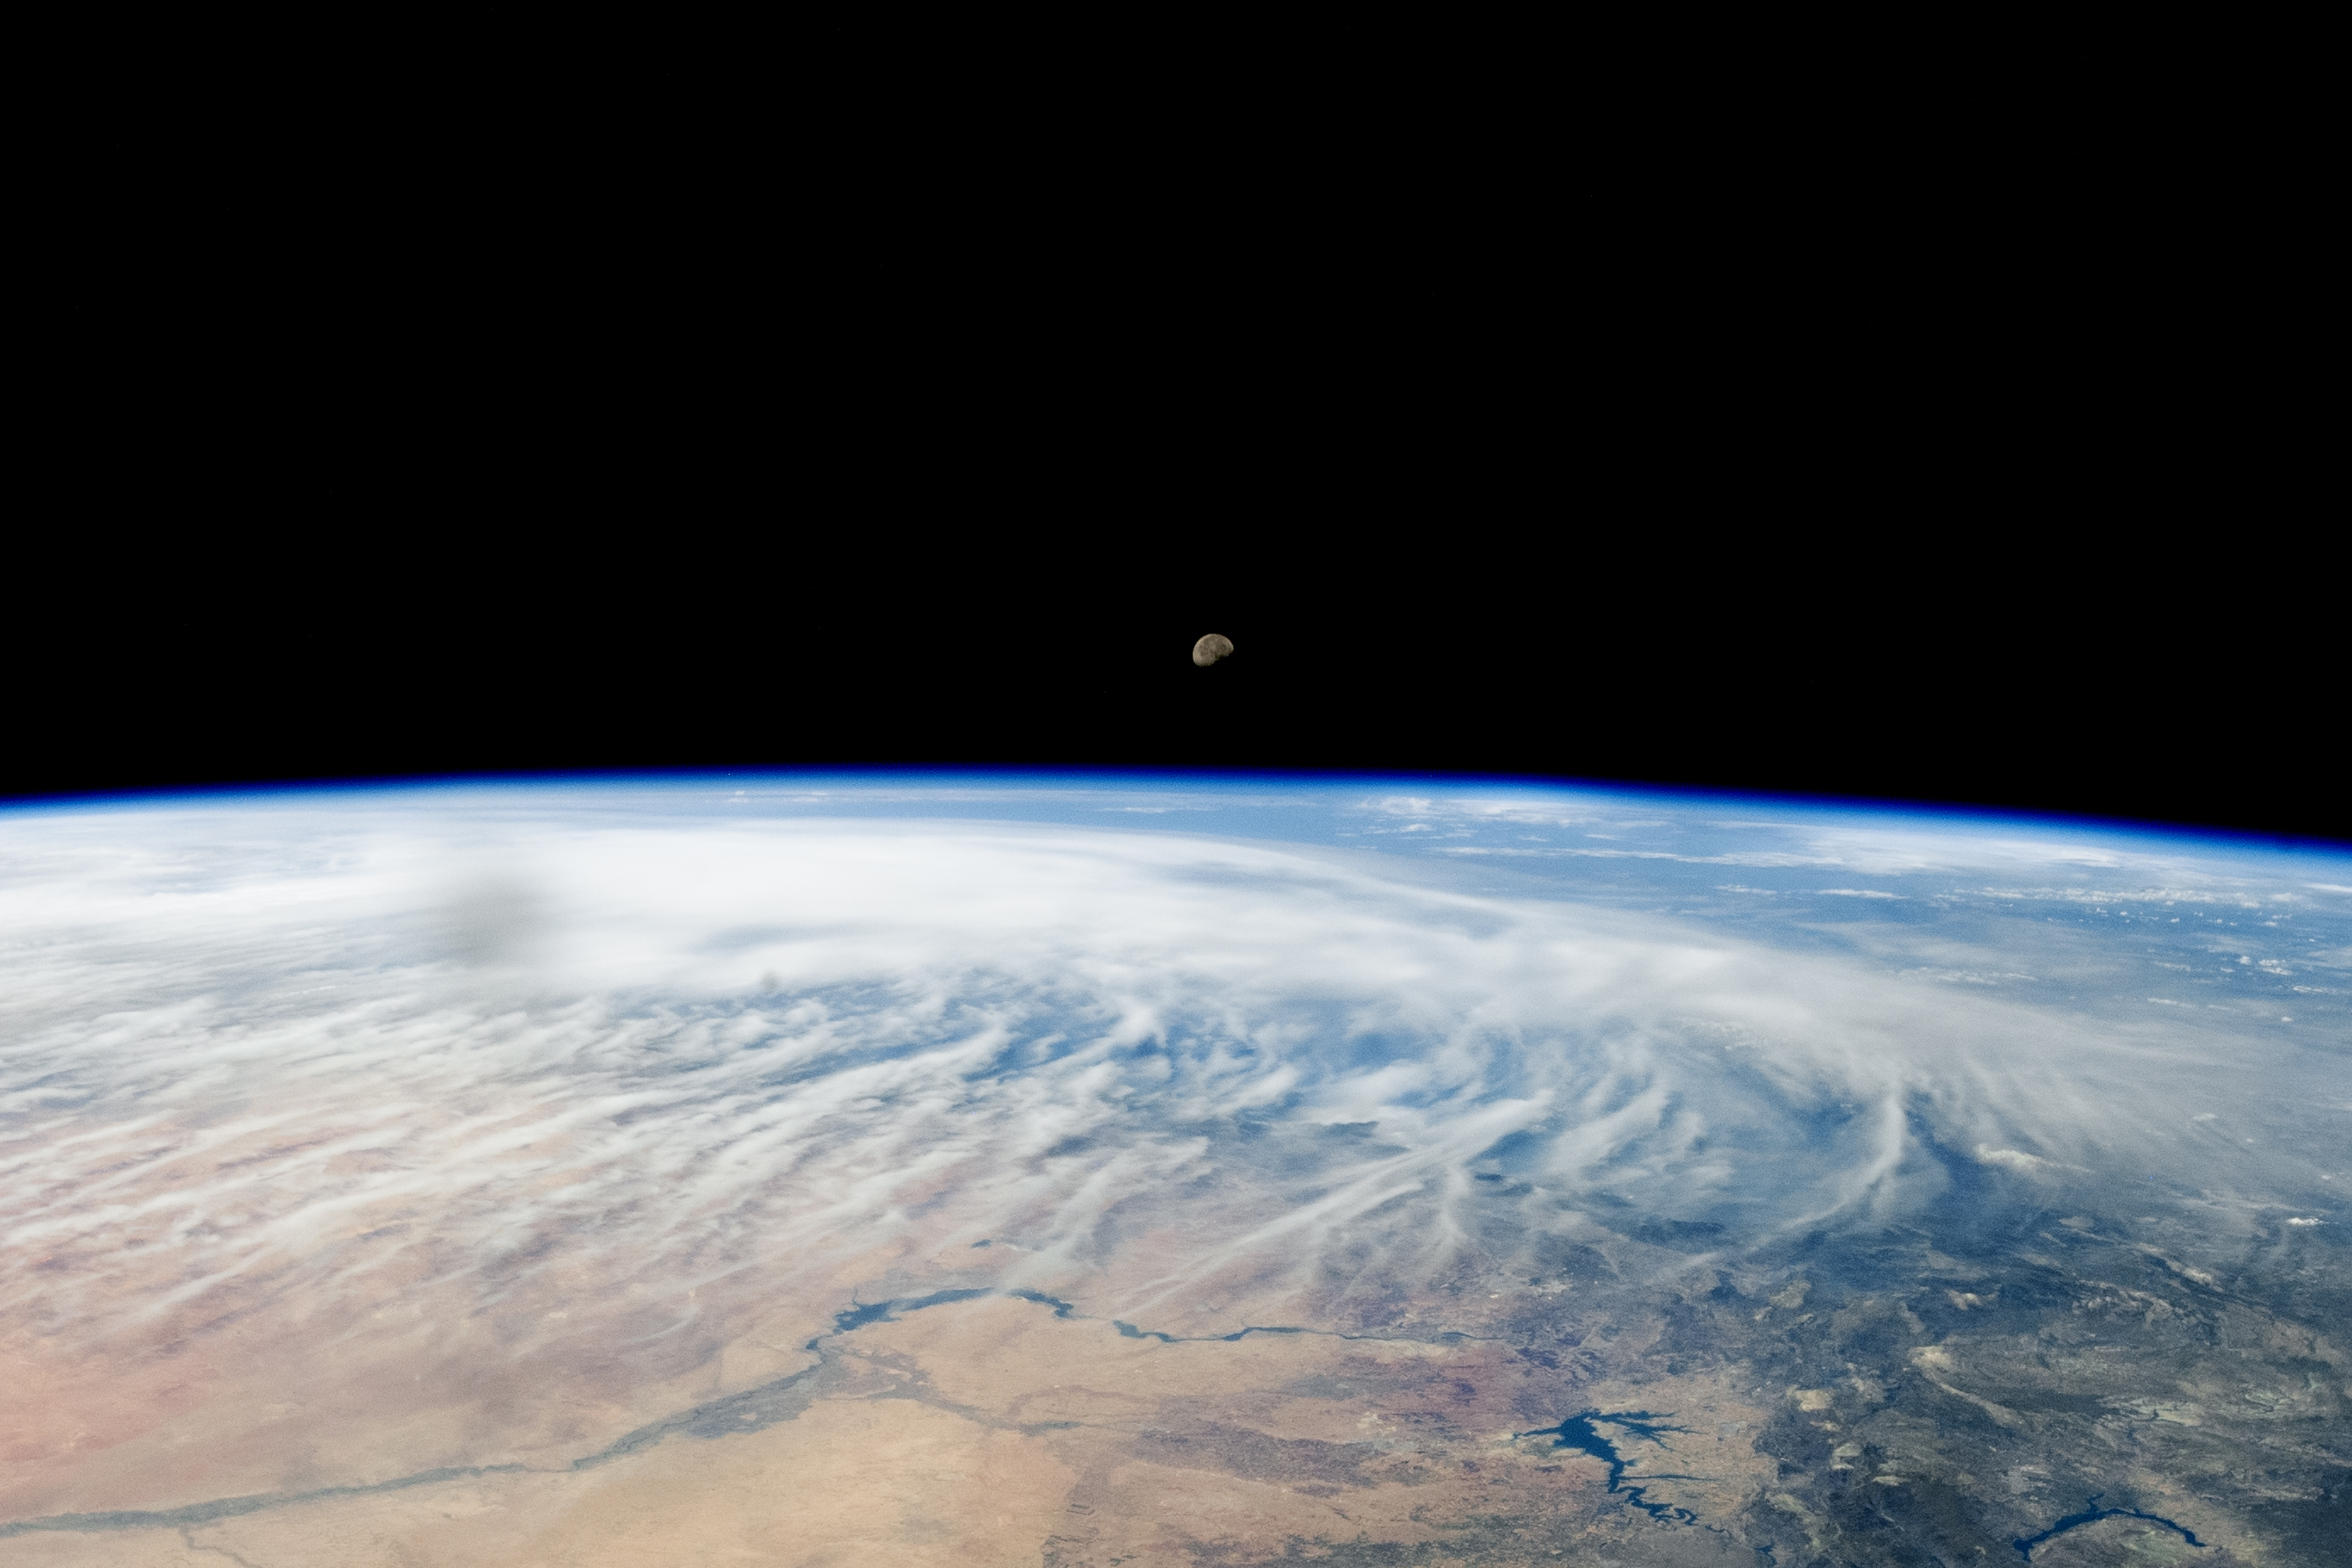 An oblique-angle photo taken from above the Middle East captures the Moon peeking over Earth’s atmospheric limb.